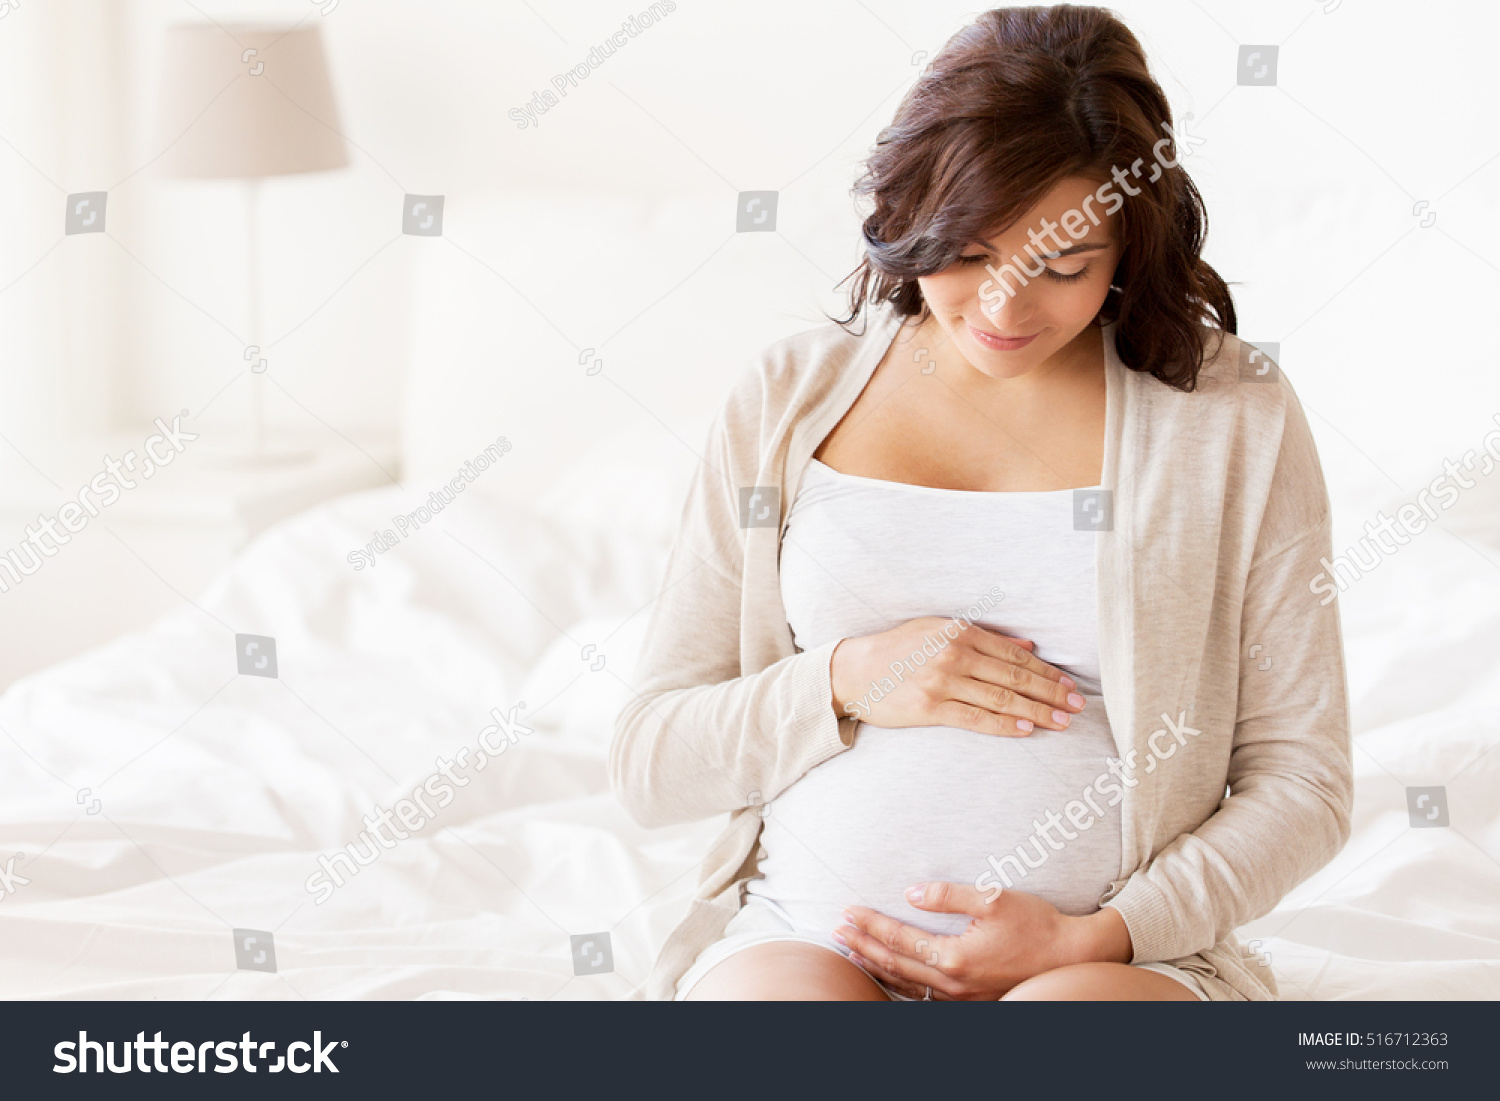 Pregnant People 13